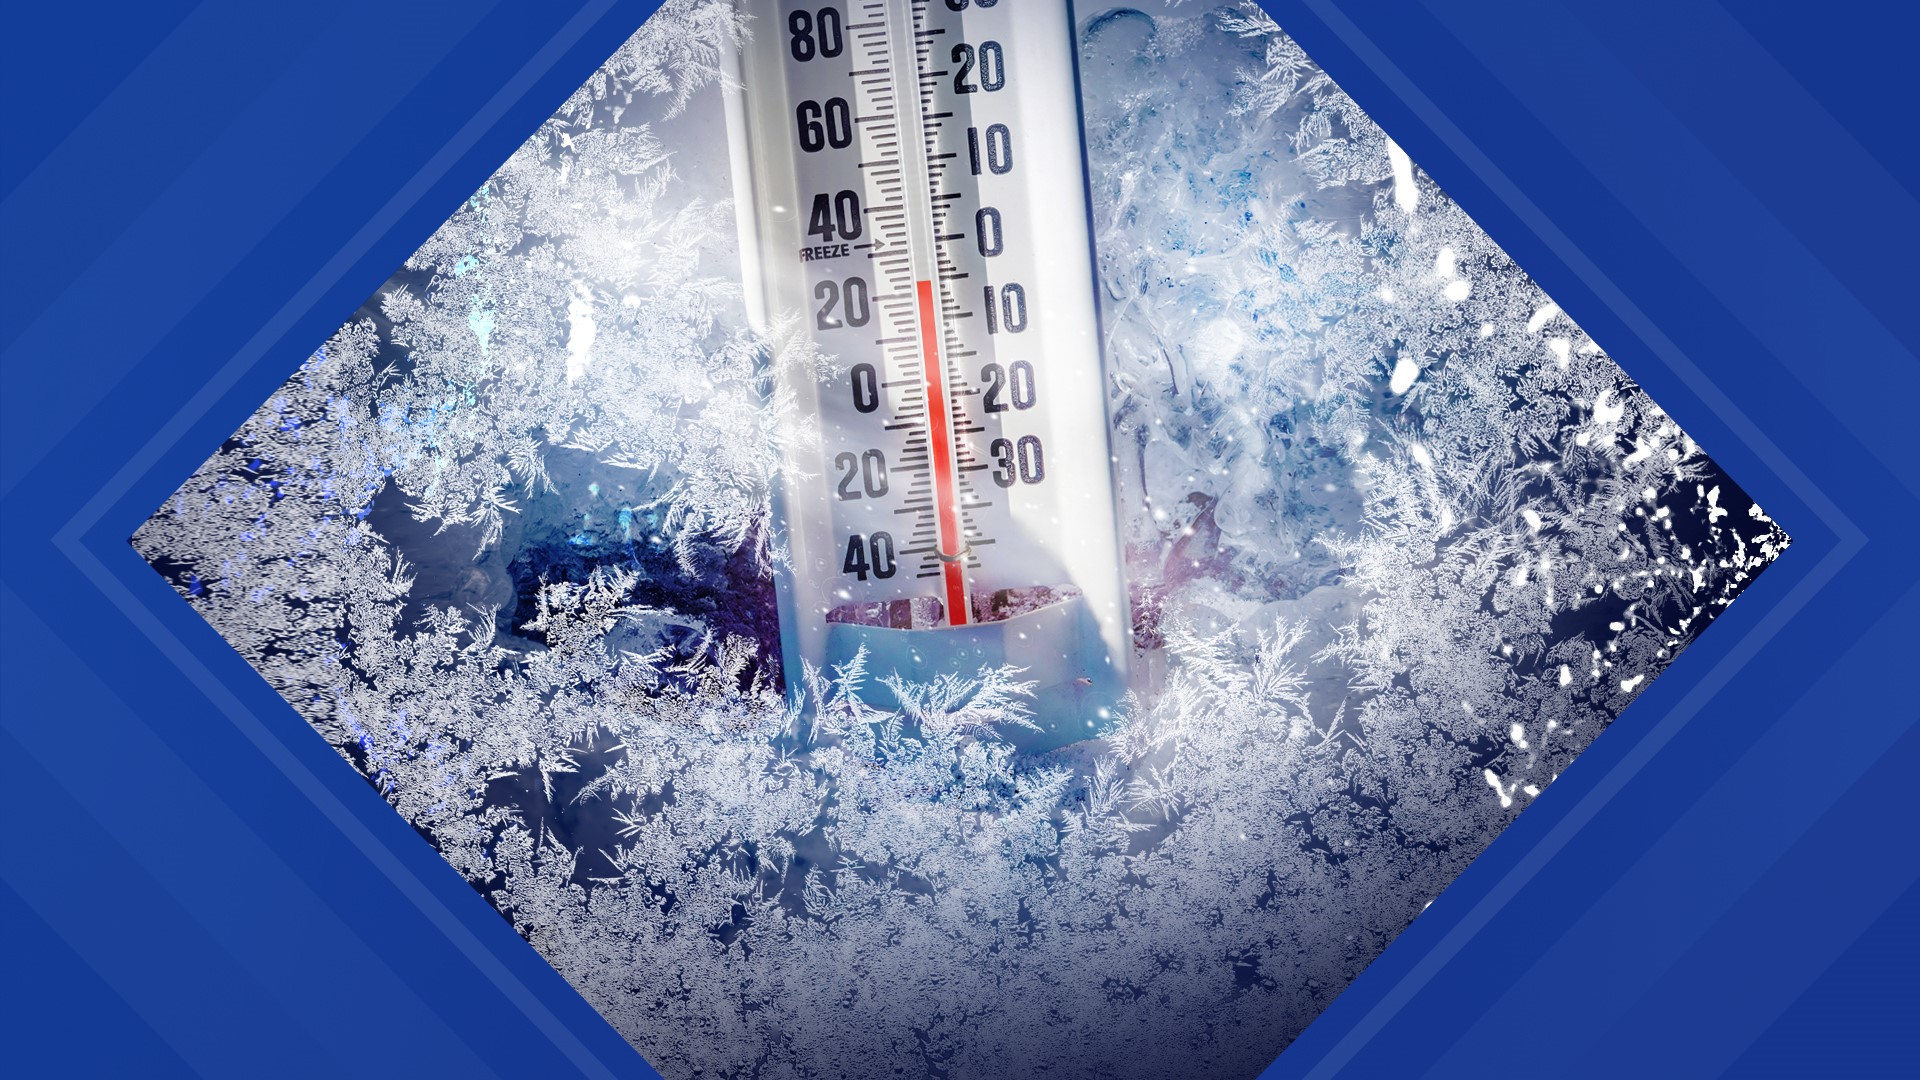 County officials are sounding the alarm ahead of forecasted cold weather.